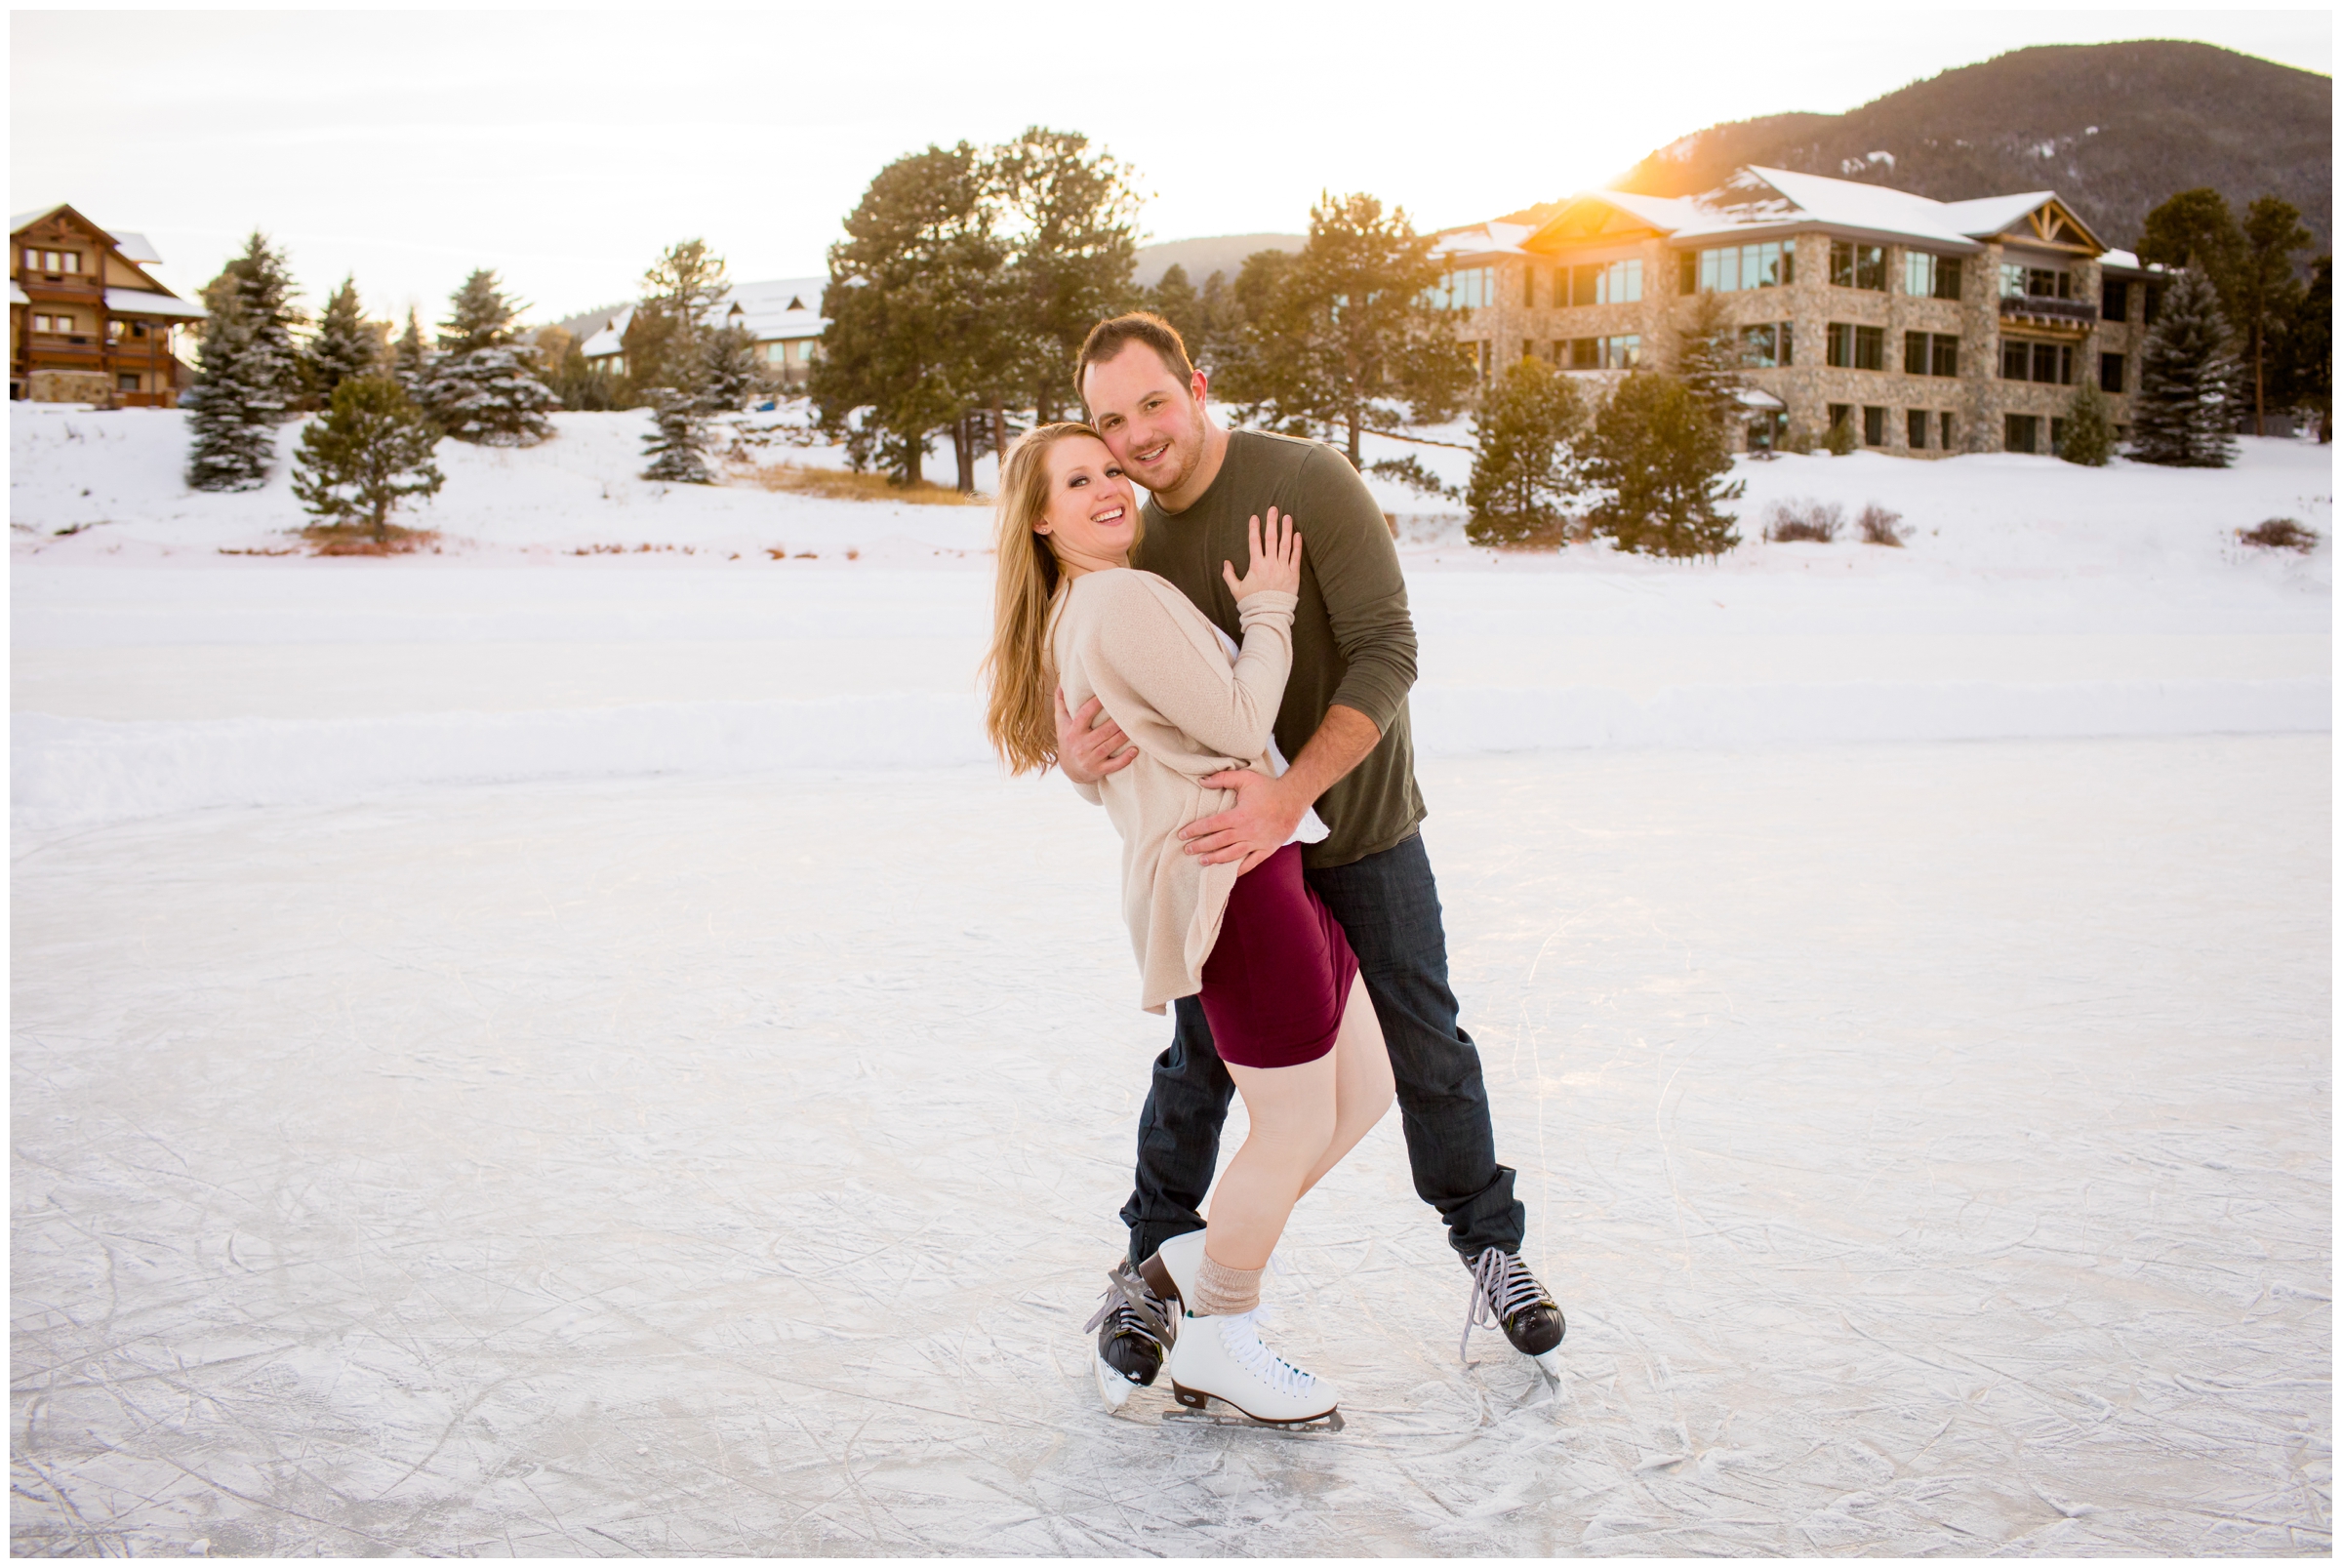 Ice skating engagement photos in the Colorado mountains by Evergreen photographer Plum Pretty Photography